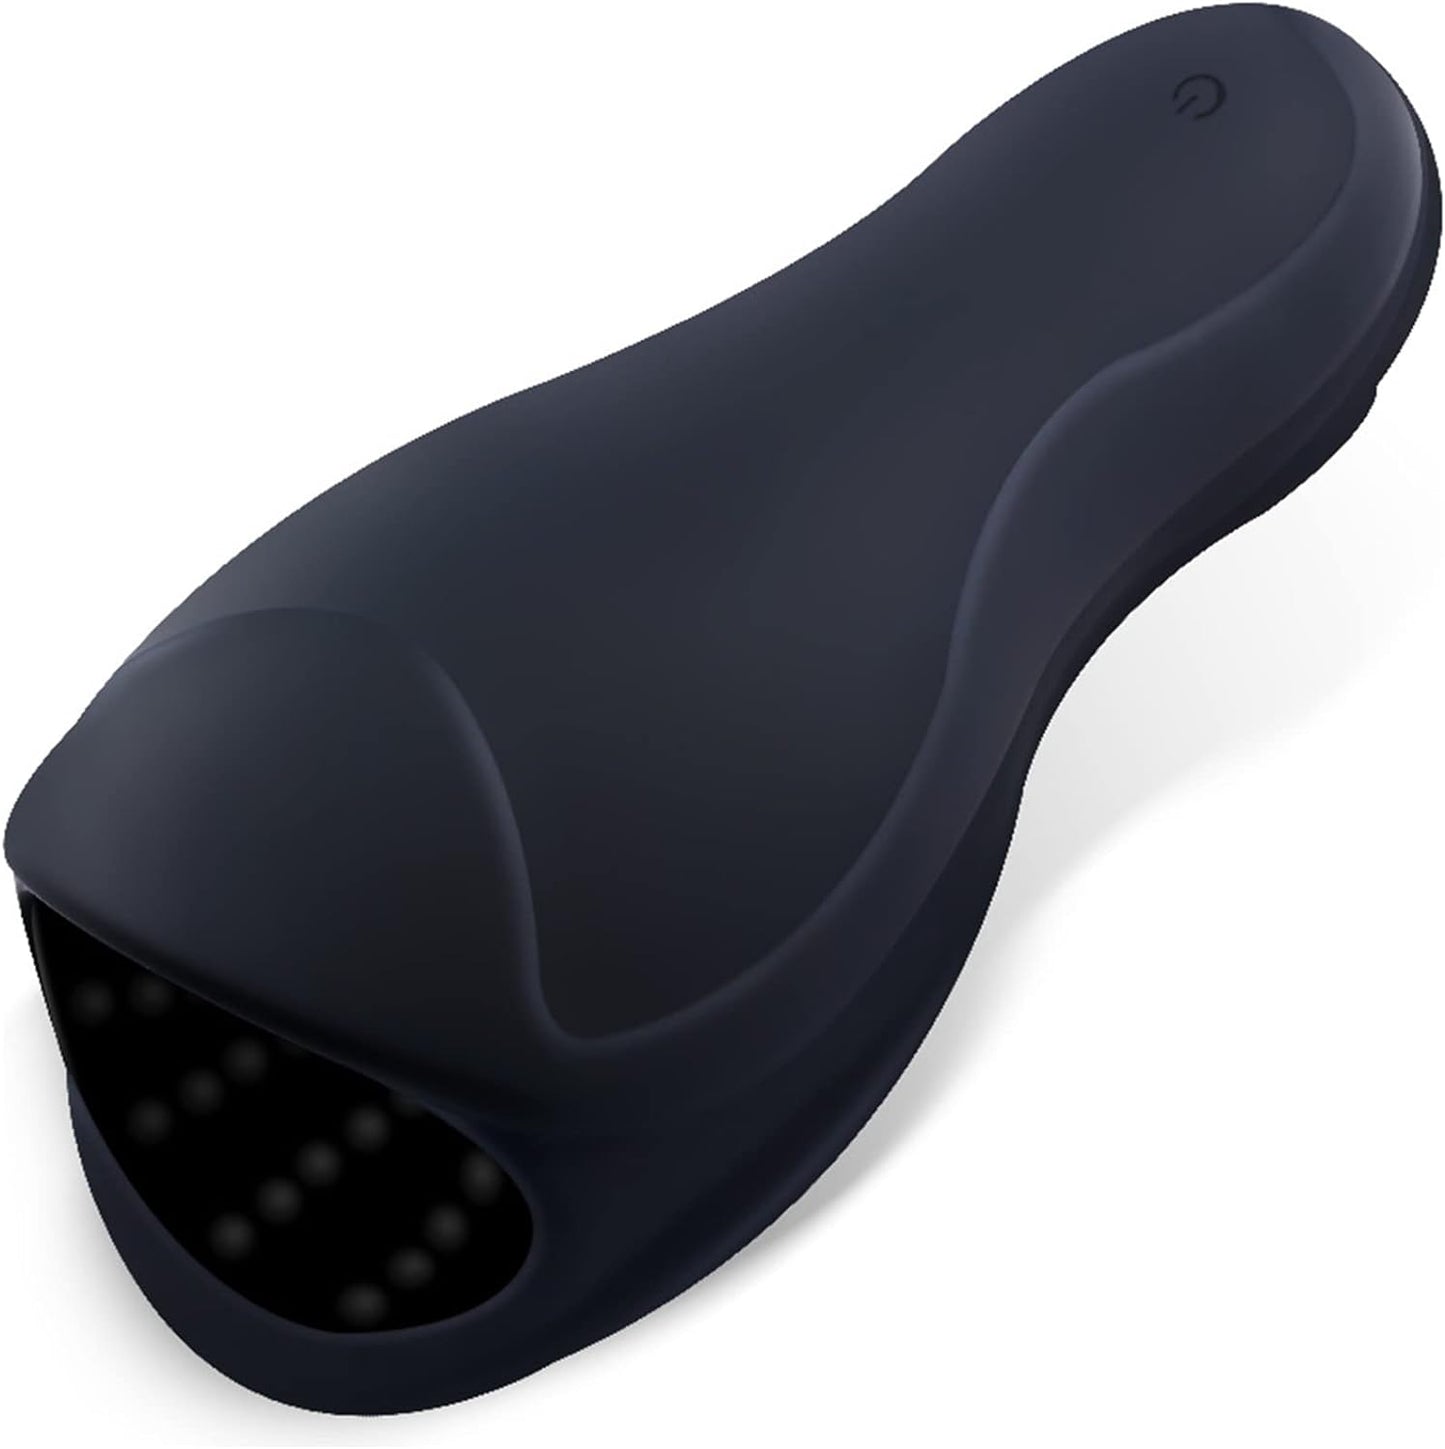 Glans vibrator with tongue licking penis vibrators sleeve with 6 vibration modes 